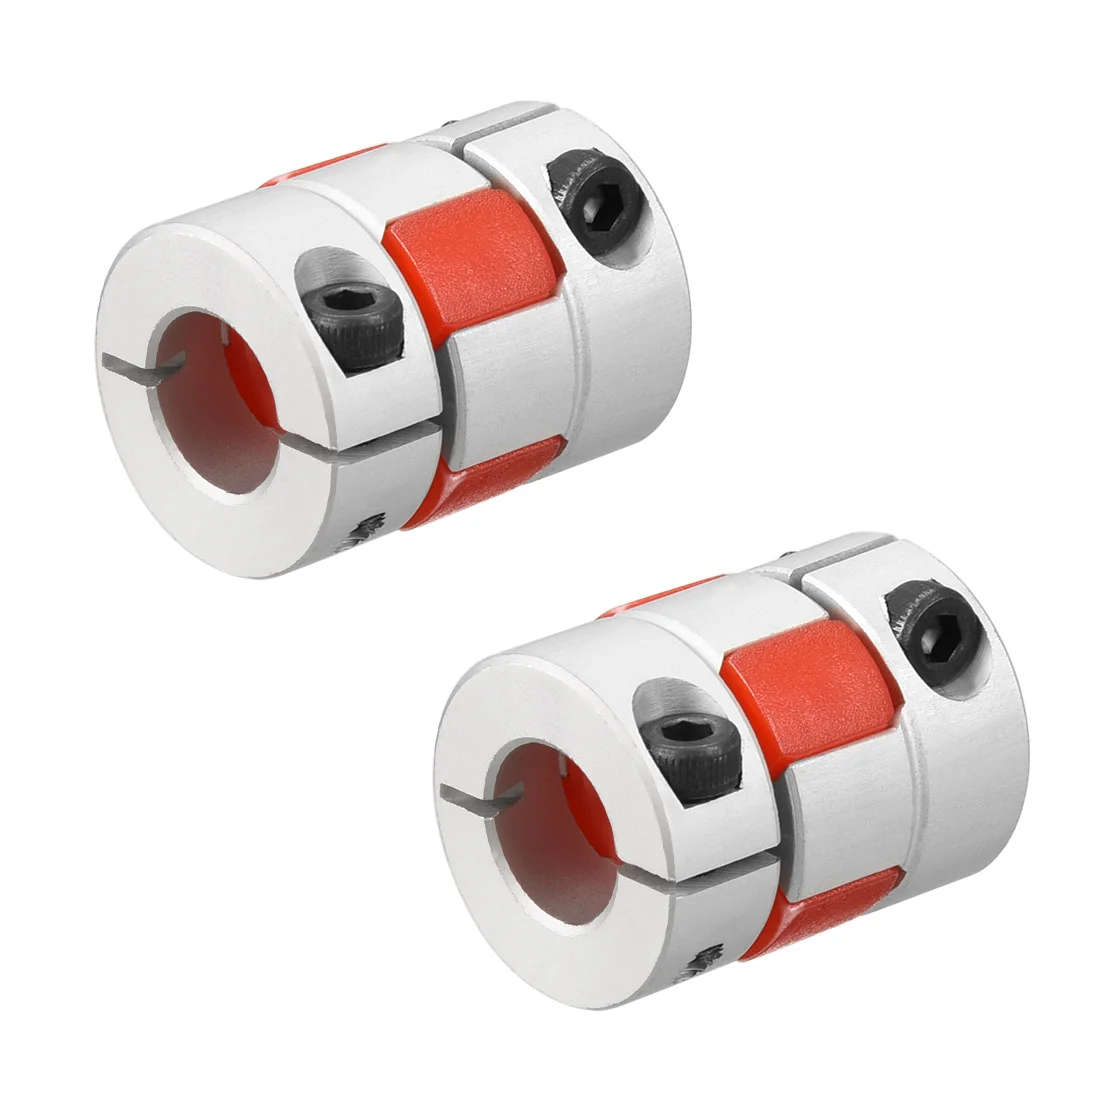 

uxcell 2pcs Shaft Coupling 10mm to 10mm Bore L25xD20 Flexible Coupler Joint for Servo Stepped Motor